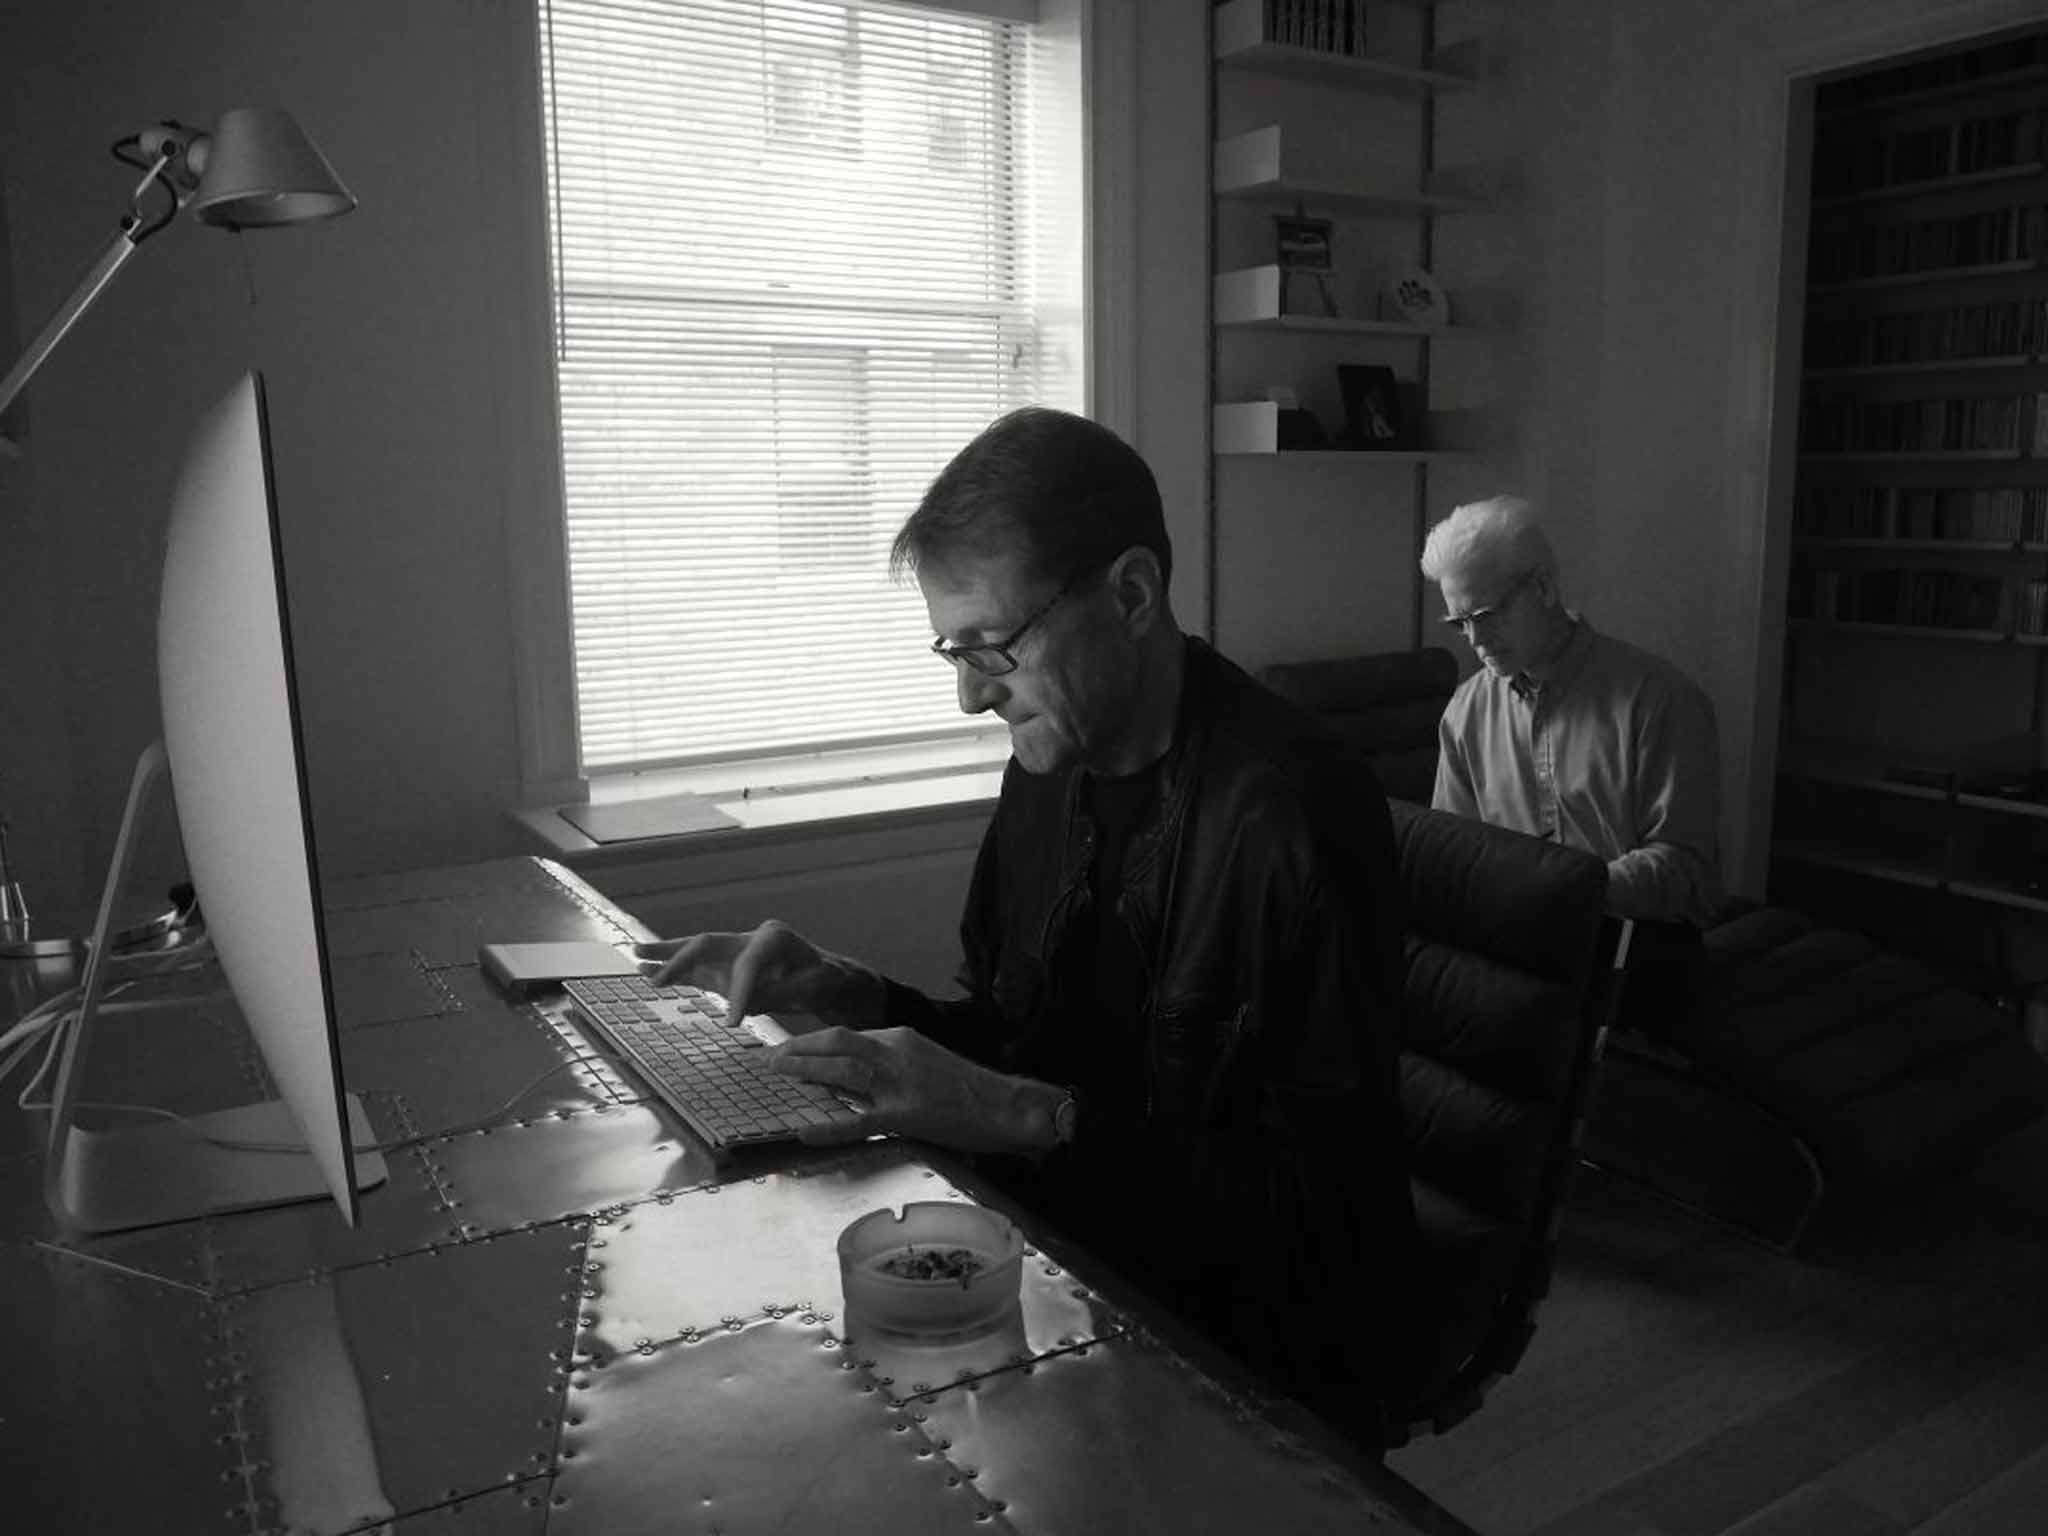 Novel approach: Andy Martin observes quietly in the background while Lee Child works on his latest book